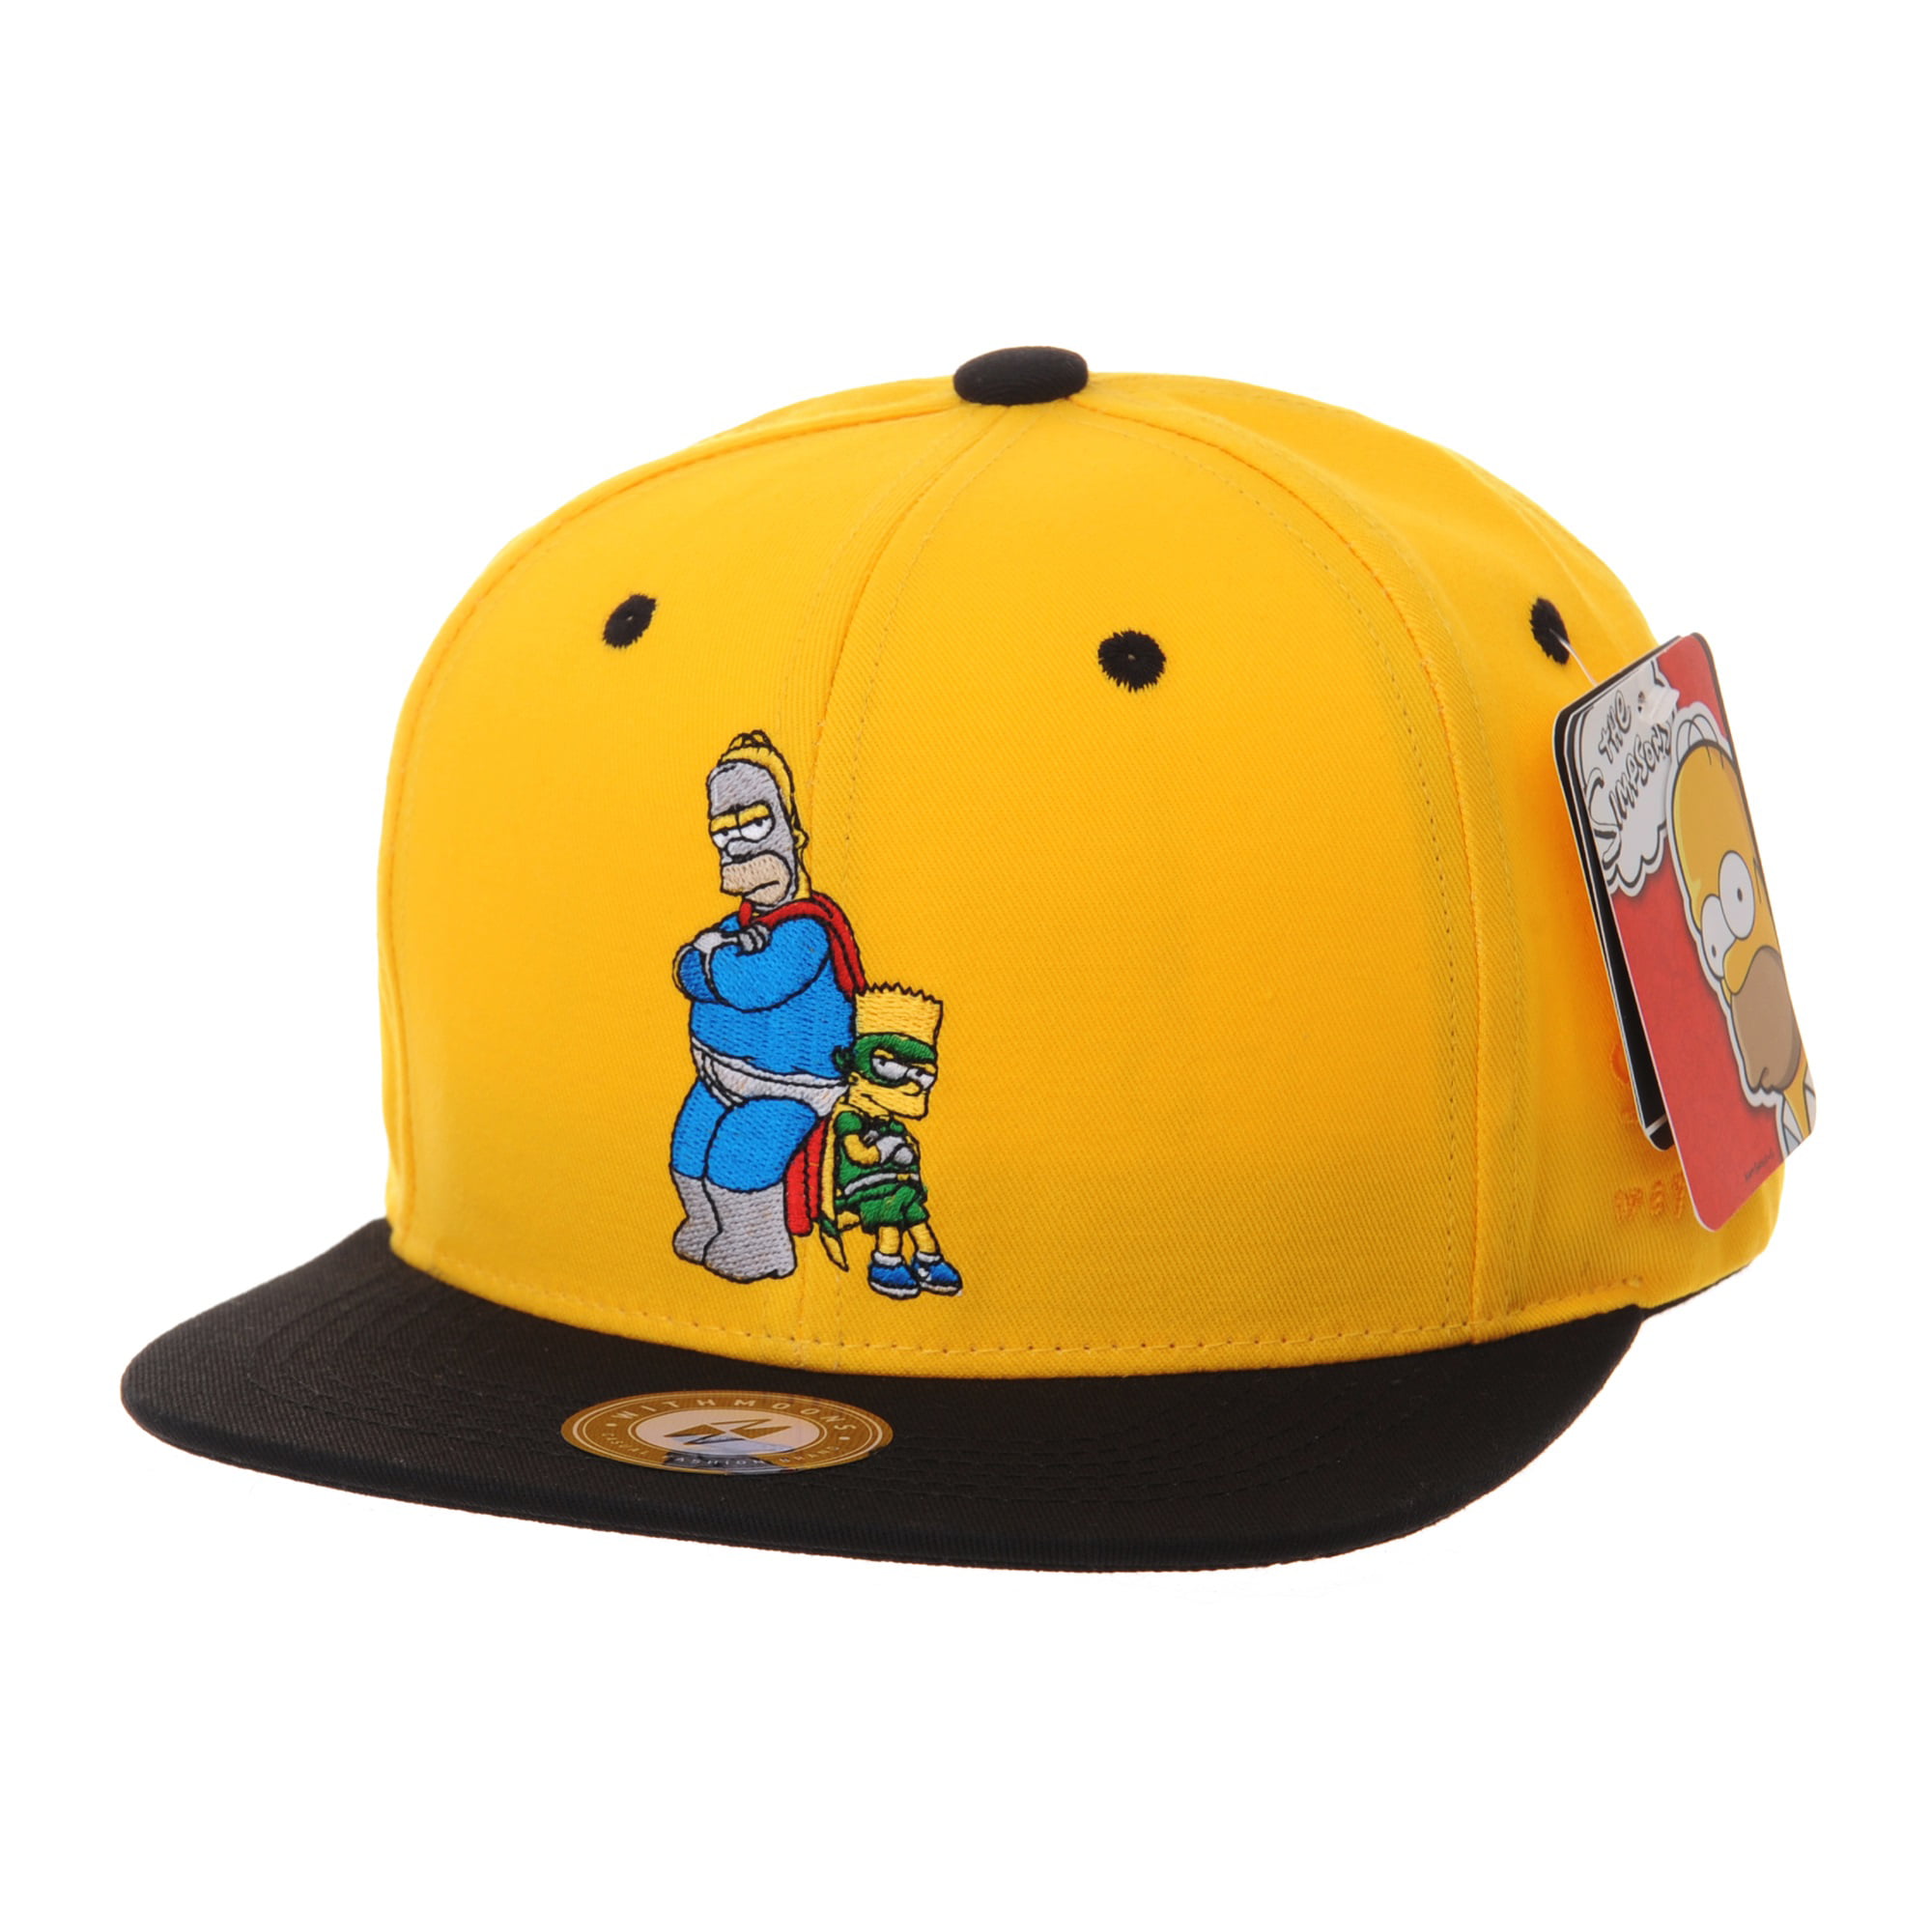 WITHMOONS The Simpsons Baseball Cap Superman Snapback Hat HL2657 (Yellow)